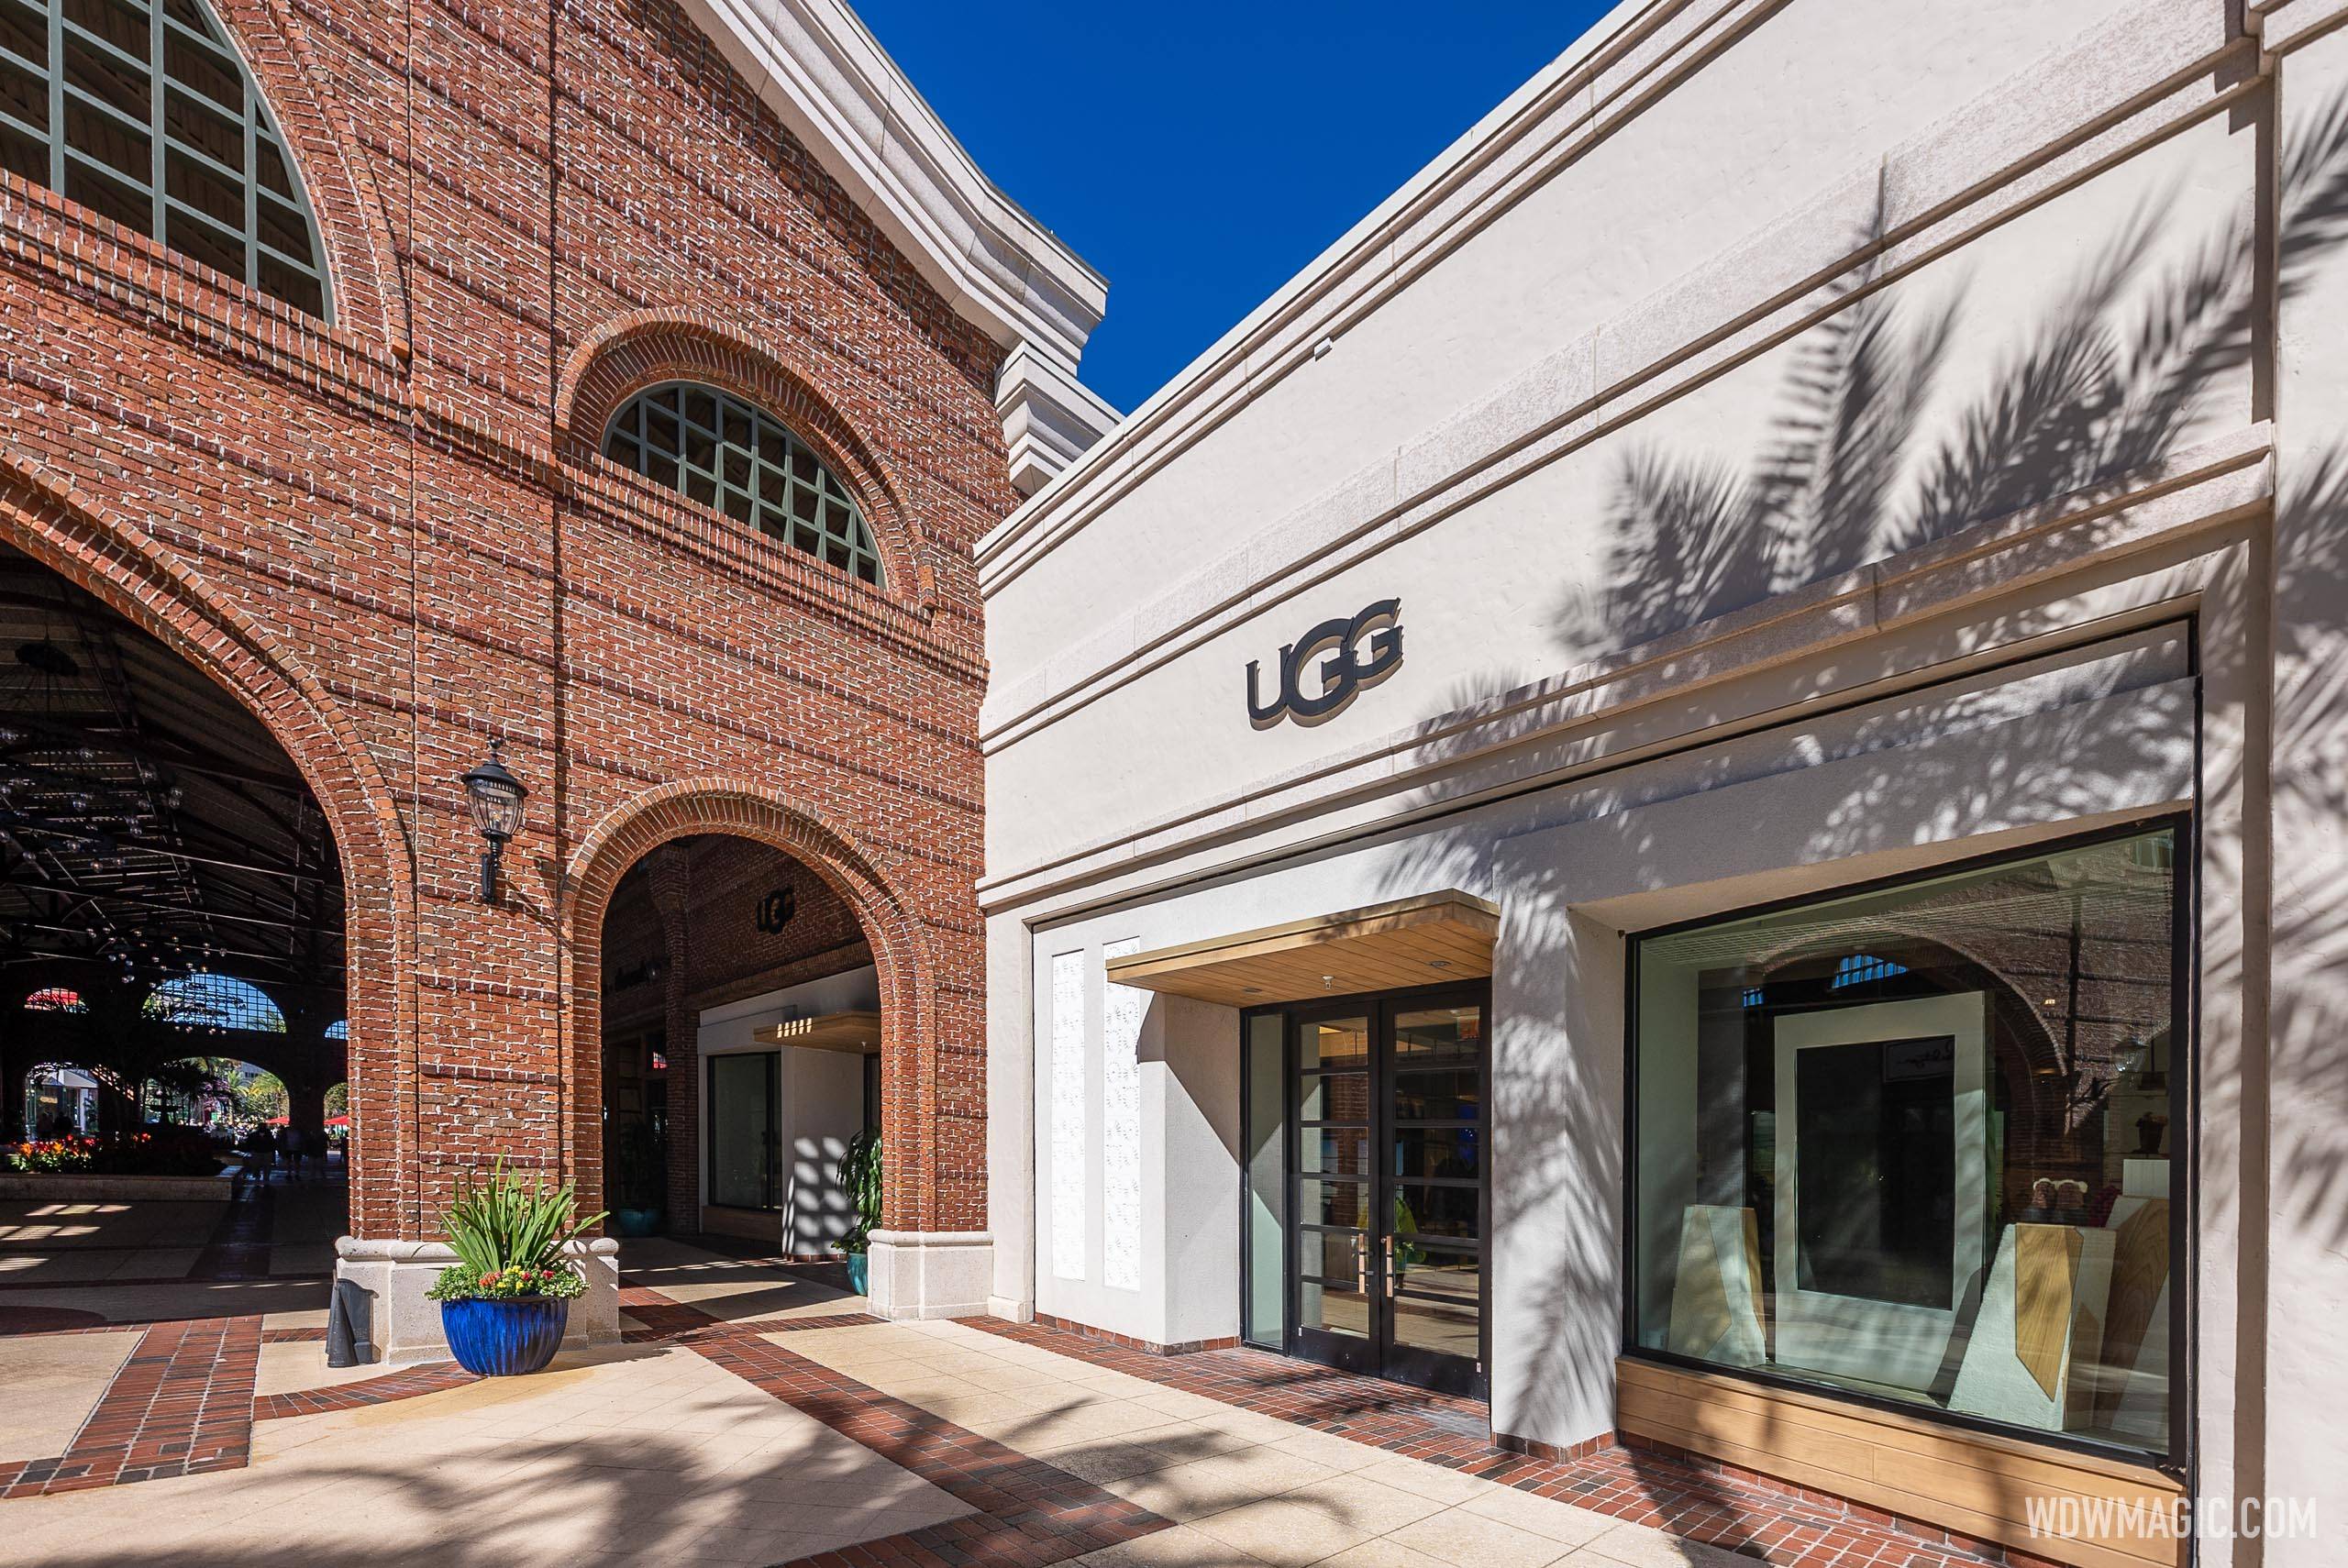 The former UGG location will soon be home to a larger Lululemon store